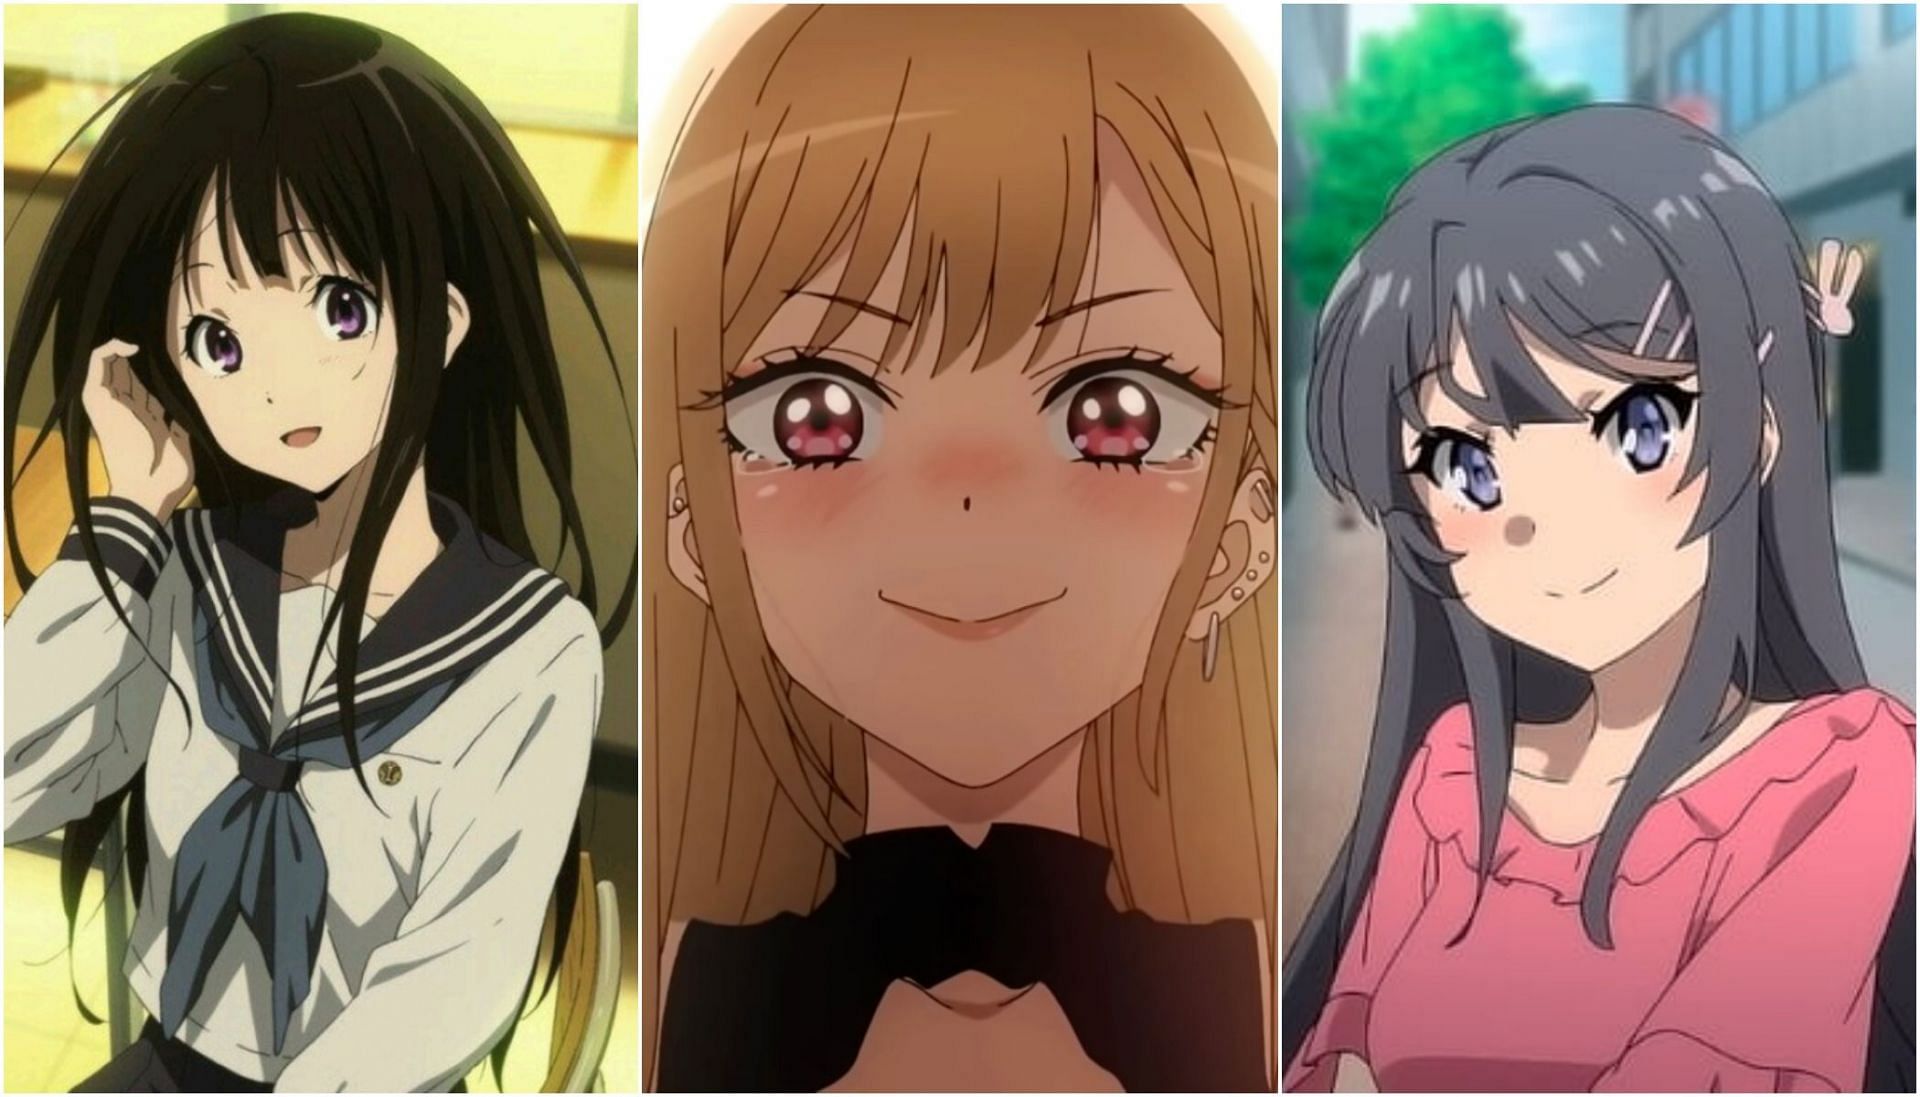 some of the series one must watch if they enjoy My Dress-Up Darling (Images via CloverWorks and Kyoto Animation)